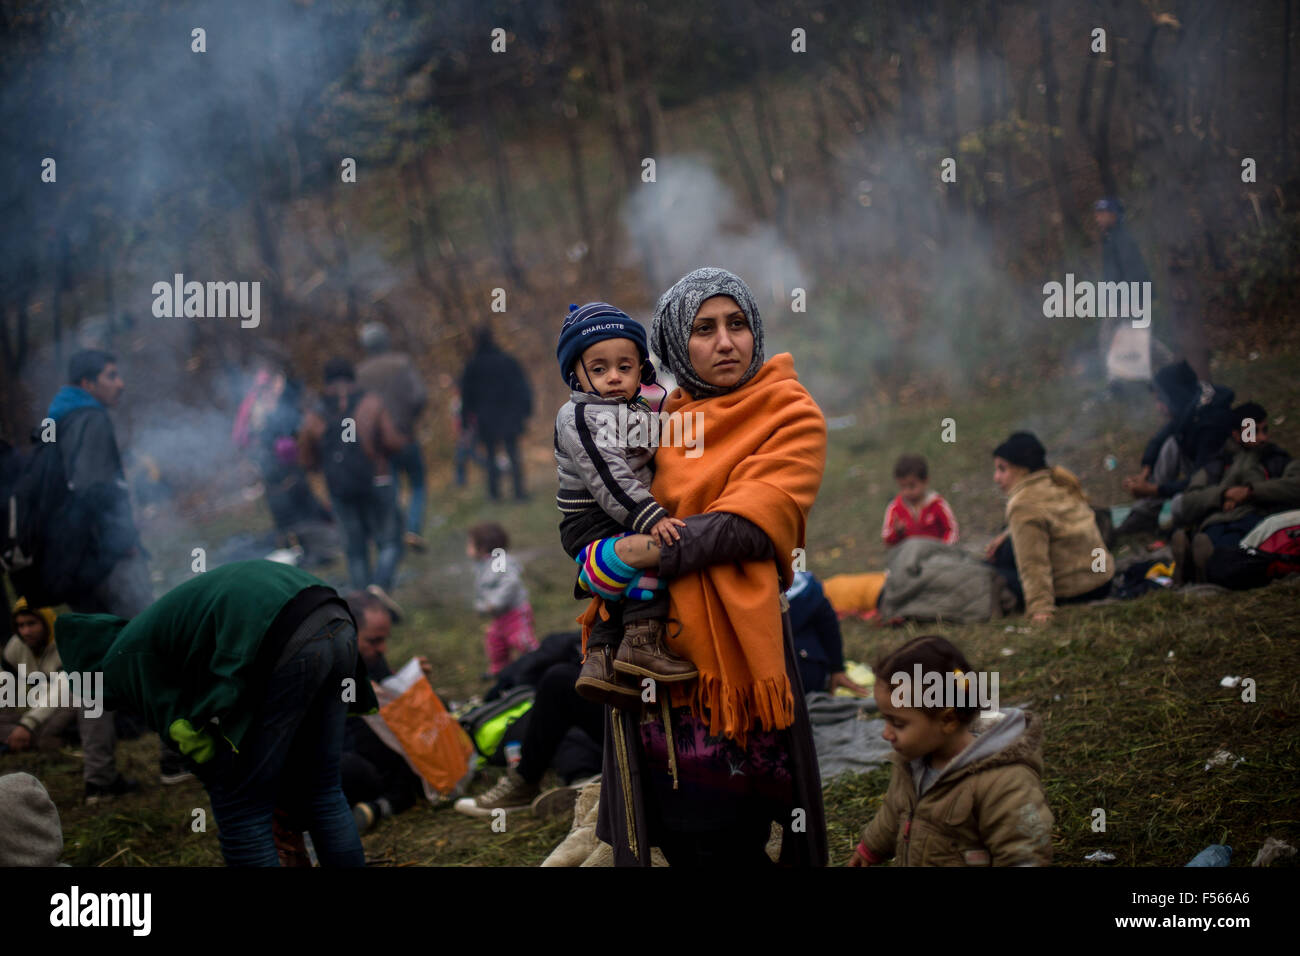 Sentilj, Slovenia. 28th Oct, 2015. A woman and child refugee from Syria wait at the border to Austria in Sentilj, Slovenia, 28 October 2015. The asylum seekers were brought to emergency accomodation by bus. Photo: MAJA HITIJ/DPA/Alamy Live News Stock Photo